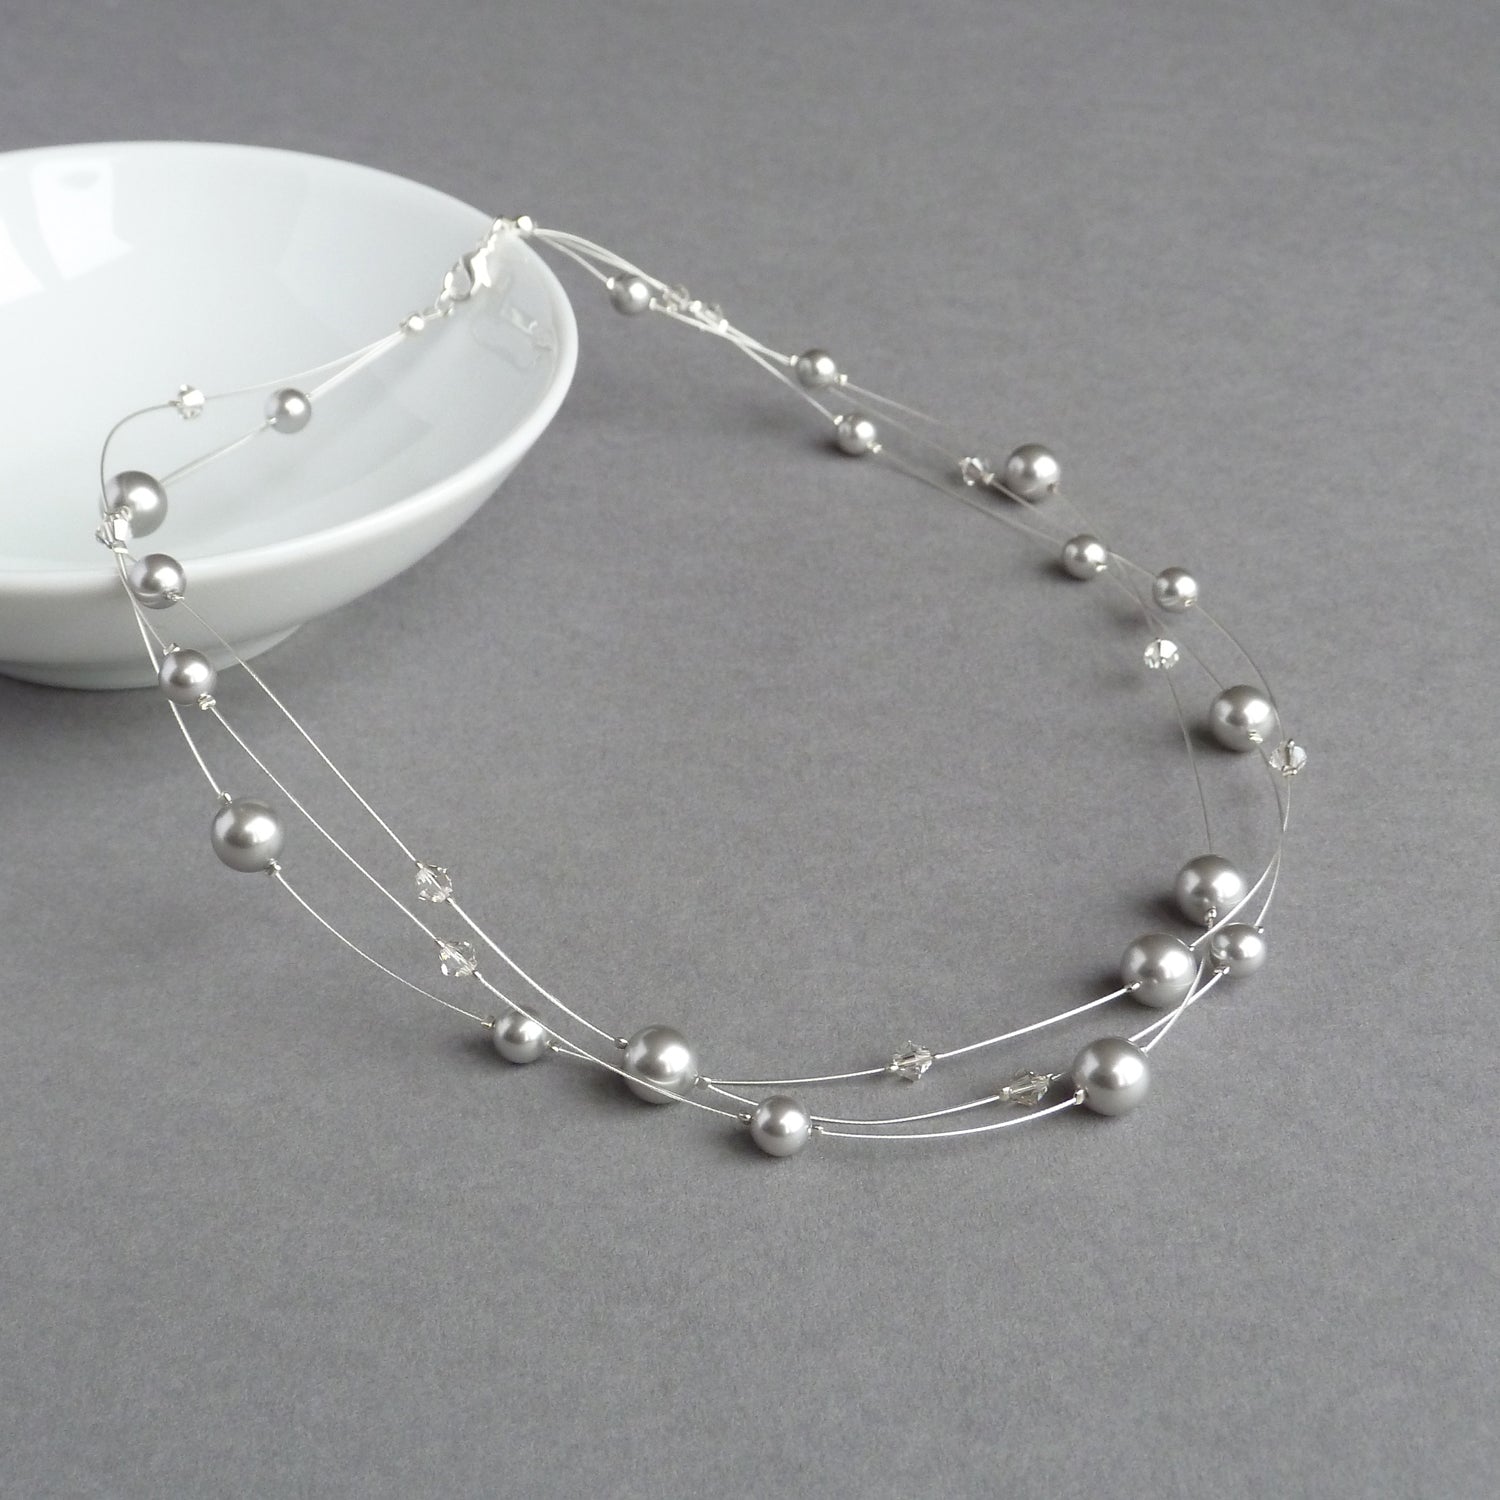 Light grey floating pearl necklace for women